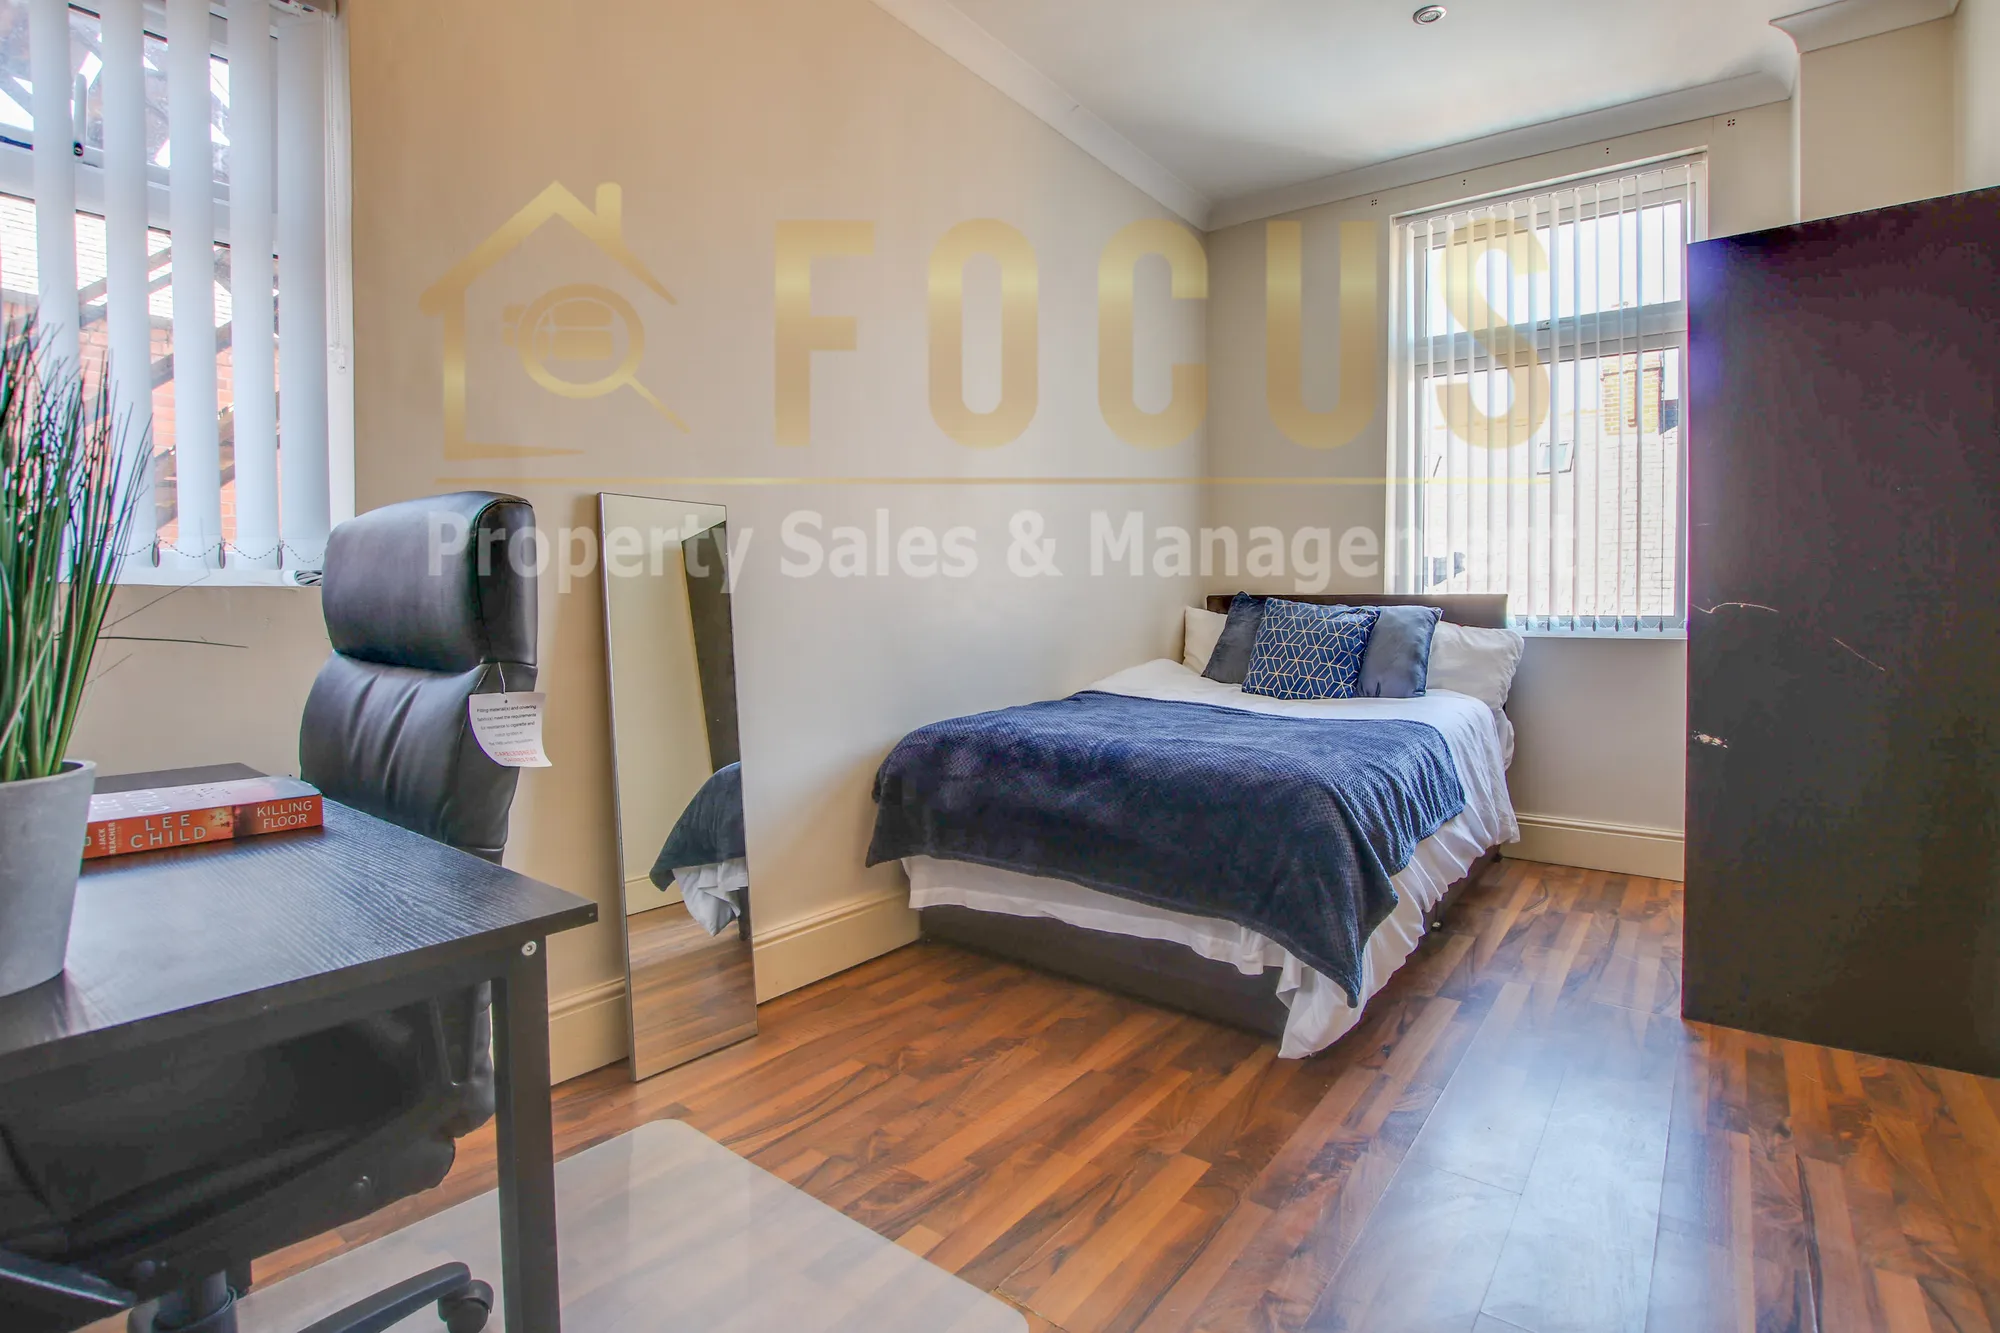 1 bed studio flat to rent in Saxby Street, Leicester - Property Image 1